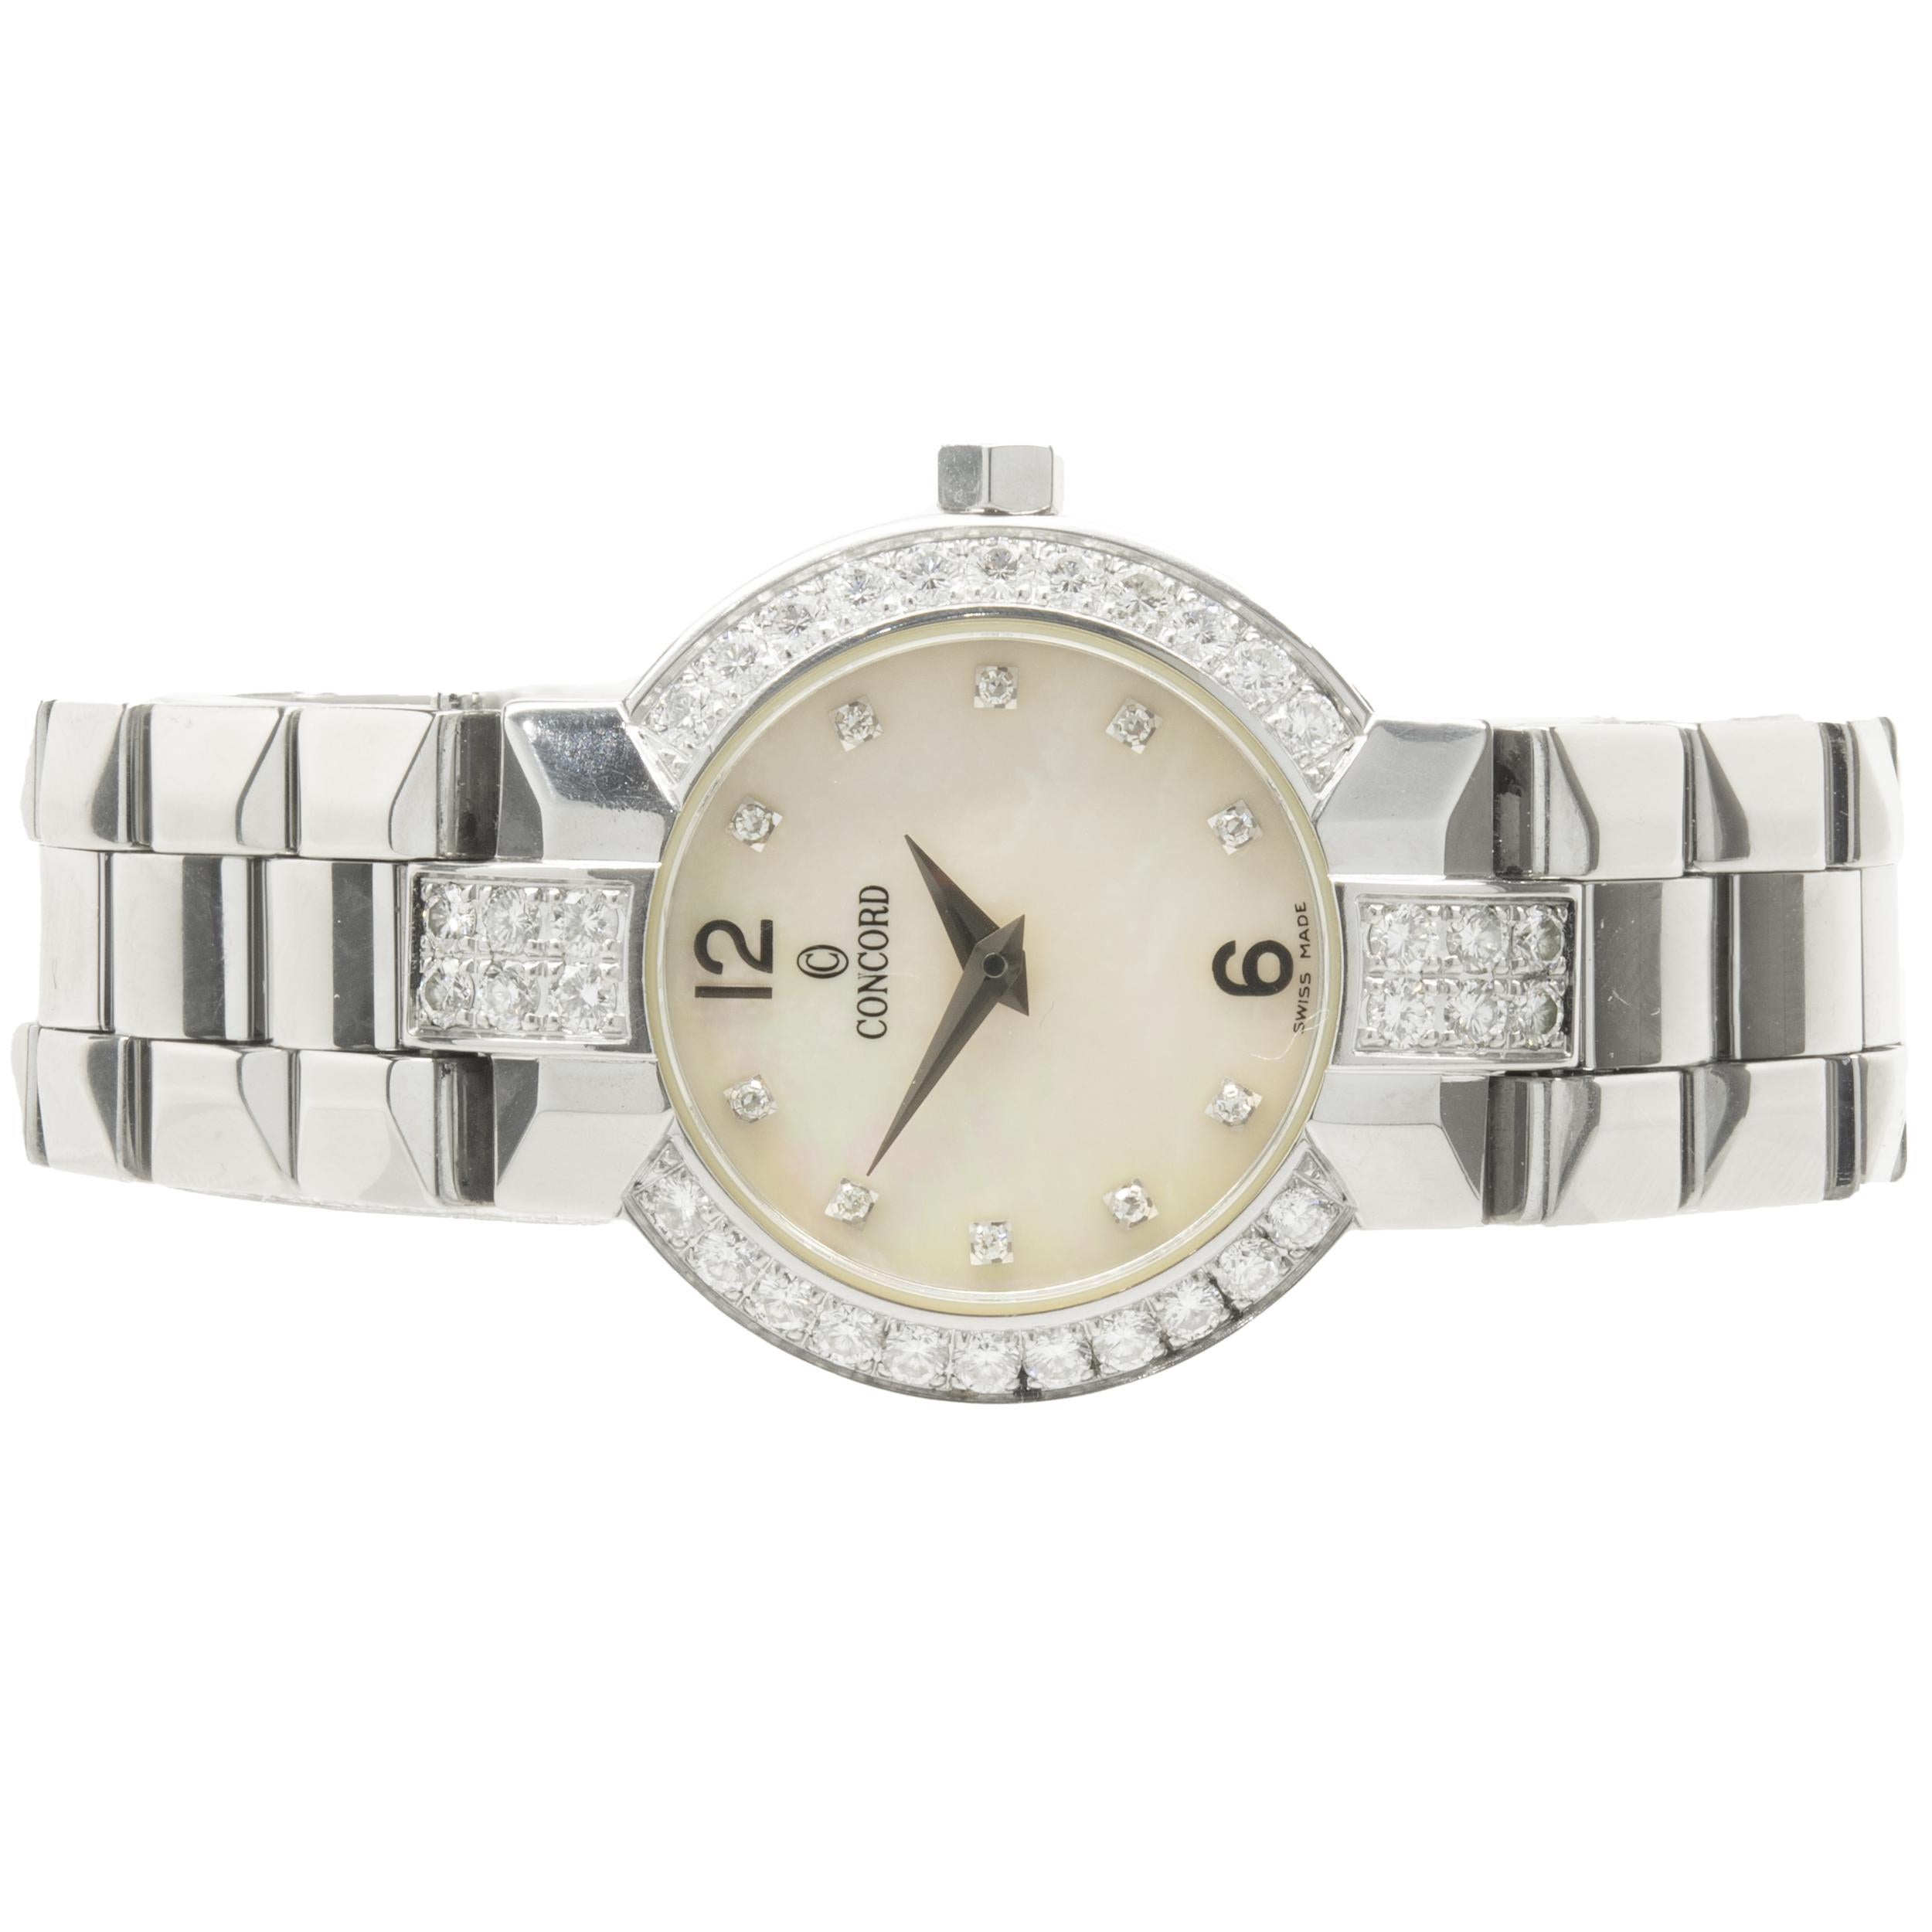 Movement: quartz
Function: hours, minutes
Case: 26mm stainless steel round case, diamond bezel, sapphire crystal, pull/push crown, water resistant
Dial: mother of pearl diamond dial
Band: Concord stainless steel La Scala bracelet, integrated